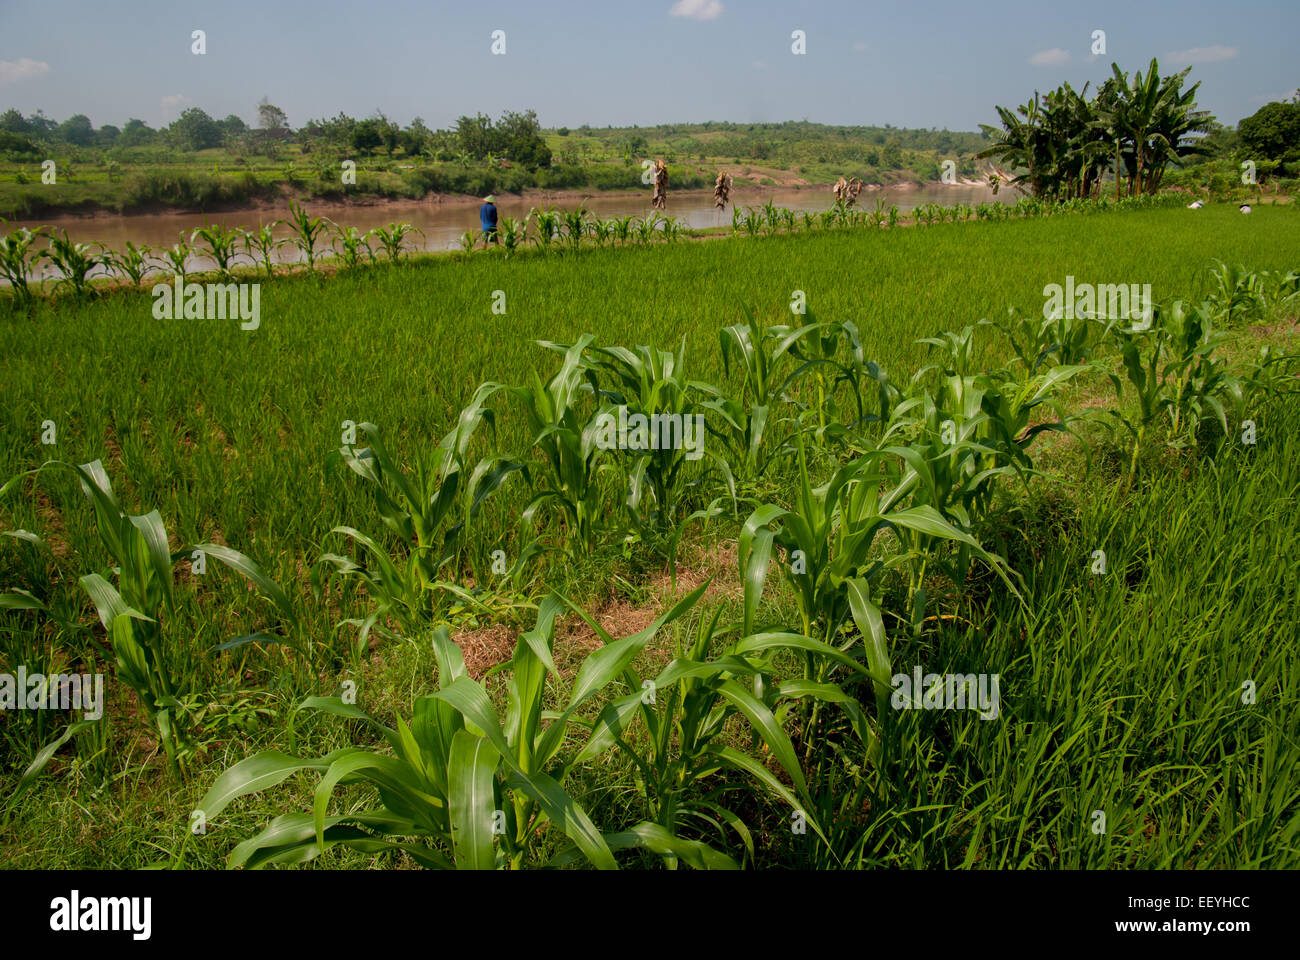 Rice and corn fields in a background of Bengawan Solo river in Kradenan district, Blora regency, Central Java province, Indonesia. Stock Photo